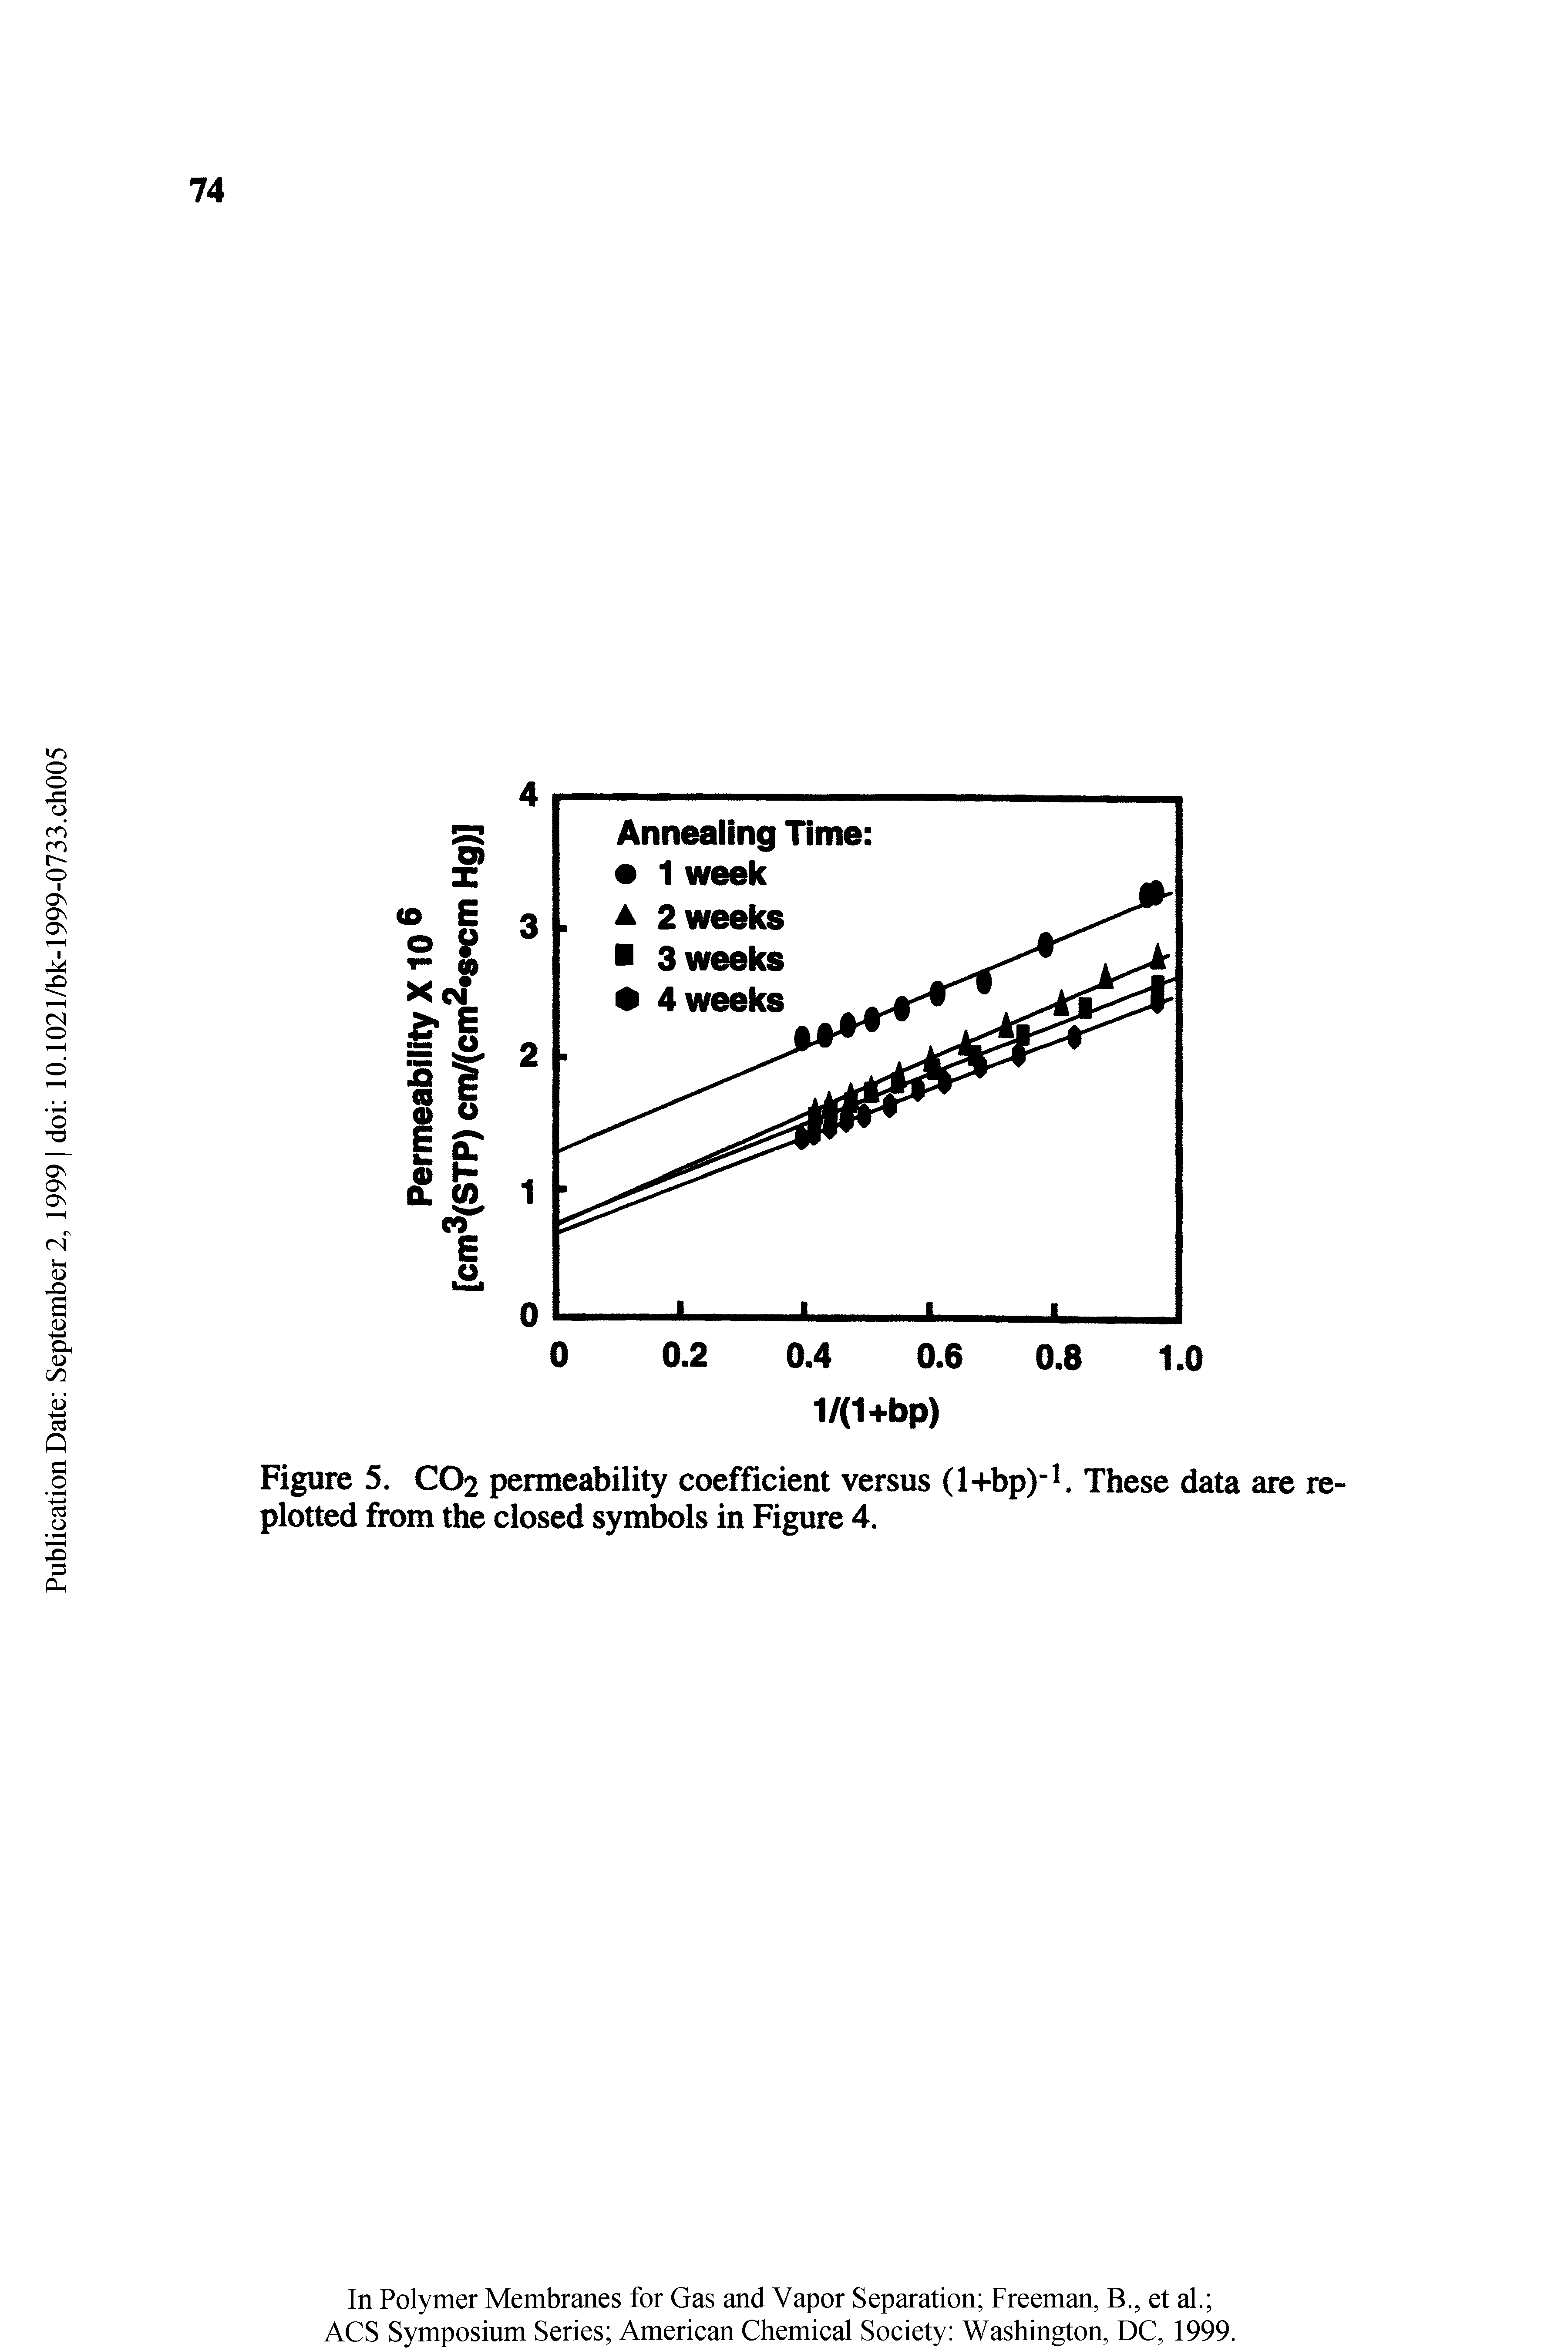 Figure 5. CO2 permeability coefficient versus (l+bp) These data are replotted from the closed symbols in Figure 4.